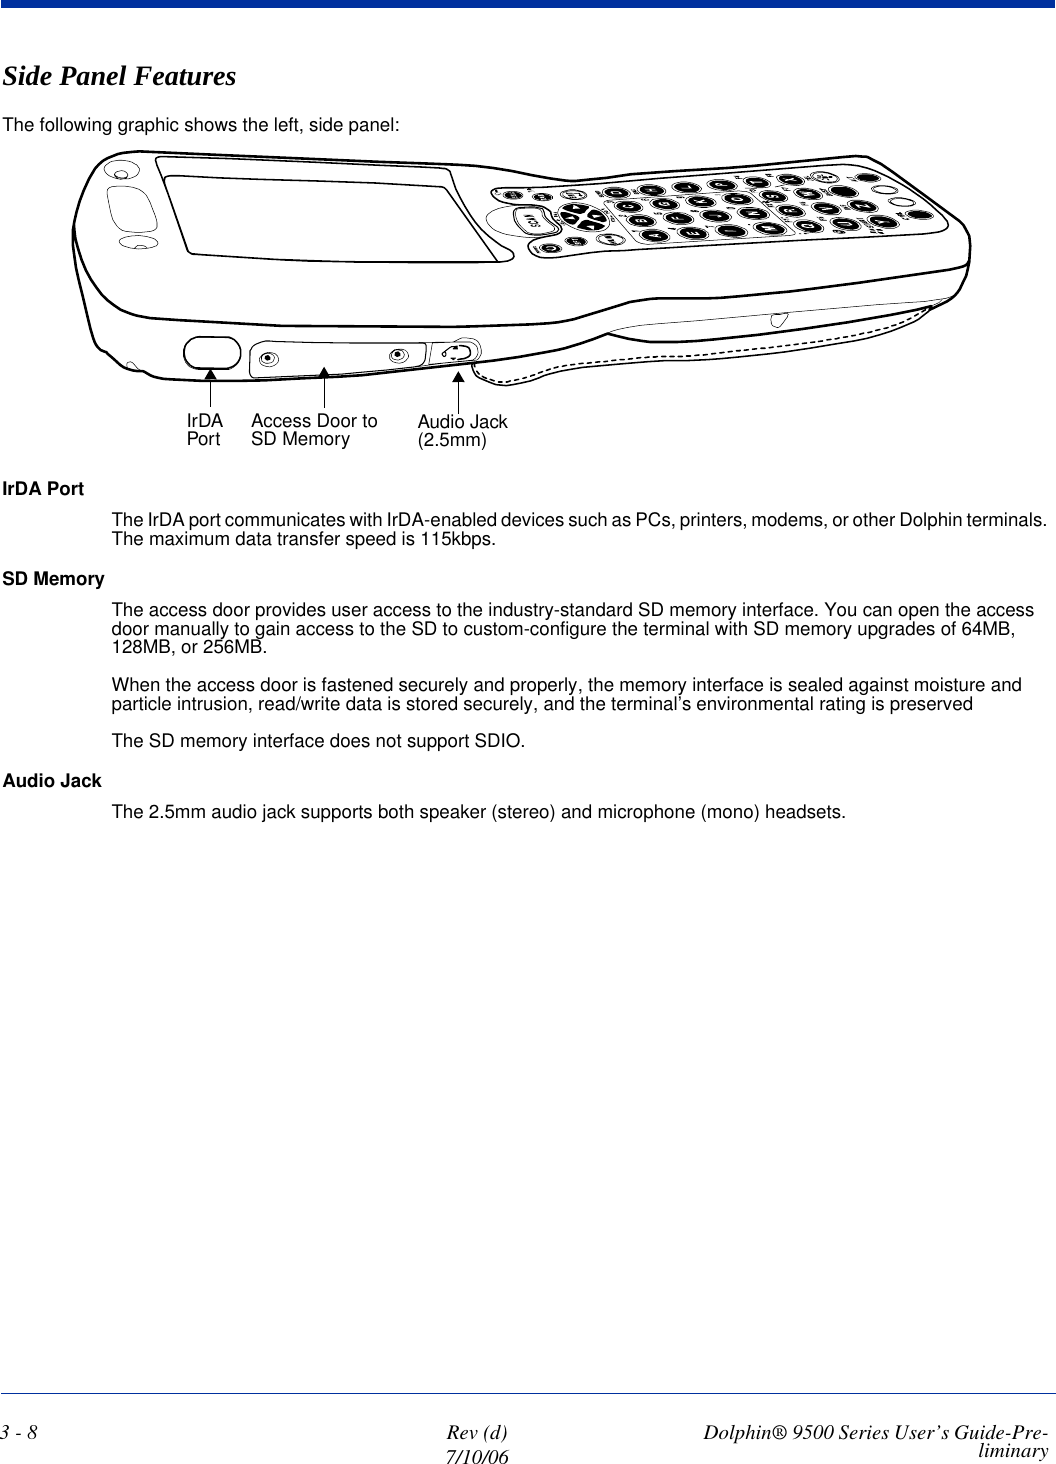 3 - 8 Rev (d)7/10/06 Dolphin® 9500 Series User’s Guide-Pre-liminarySide Panel FeaturesThe following graphic shows the left, side panel:IrDA PortThe IrDA port communicates with IrDA-enabled devices such as PCs, printers, modems, or other Dolphin terminals. The maximum data transfer speed is 115kbps.SD MemoryThe access door provides user access to the industry-standard SD memory interface. You can open the access door manually to gain access to the SD to custom-configure the terminal with SD memory upgrades of 64MB, 128MB, or 256MB. When the access door is fastened securely and properly, the memory interface is sealed against moisture and particle intrusion, read/write data is stored securely, and the terminal’s environmental rating is preservedThe SD memory interface does not support SDIO.Audio JackThe 2.5mm audio jack supports both speaker (stereo) and microphone (mono) headsets. IrDA Port Audio Jack (2.5mm)Access Door to SD Memory